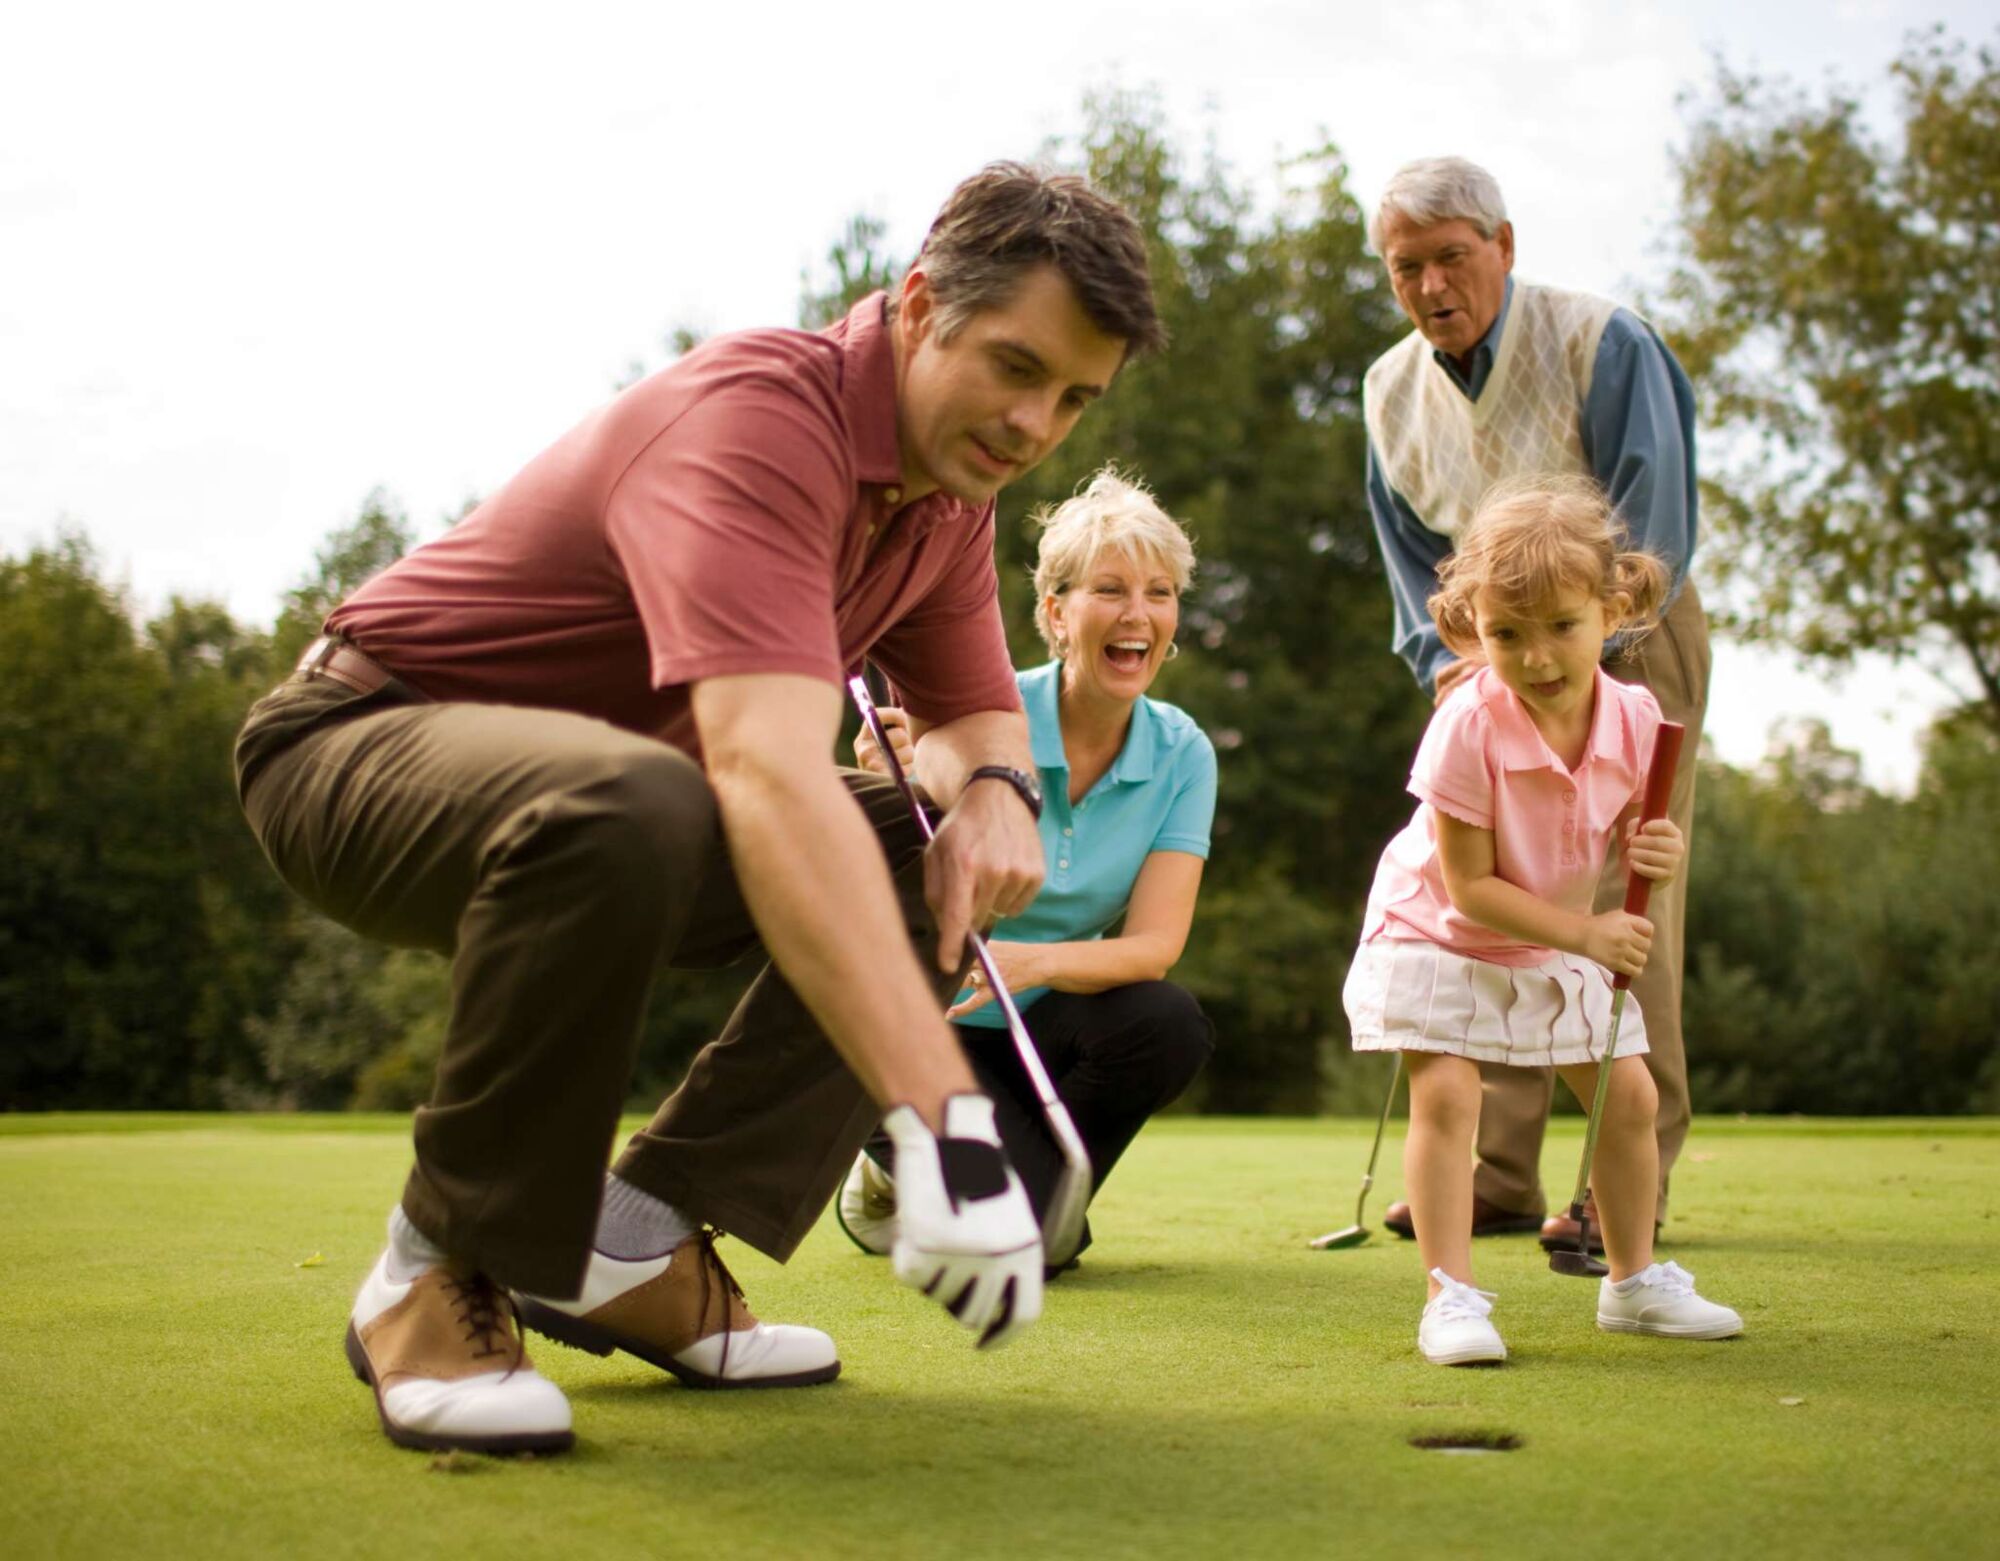 A child plays golf with her mother, father, and grandfather.